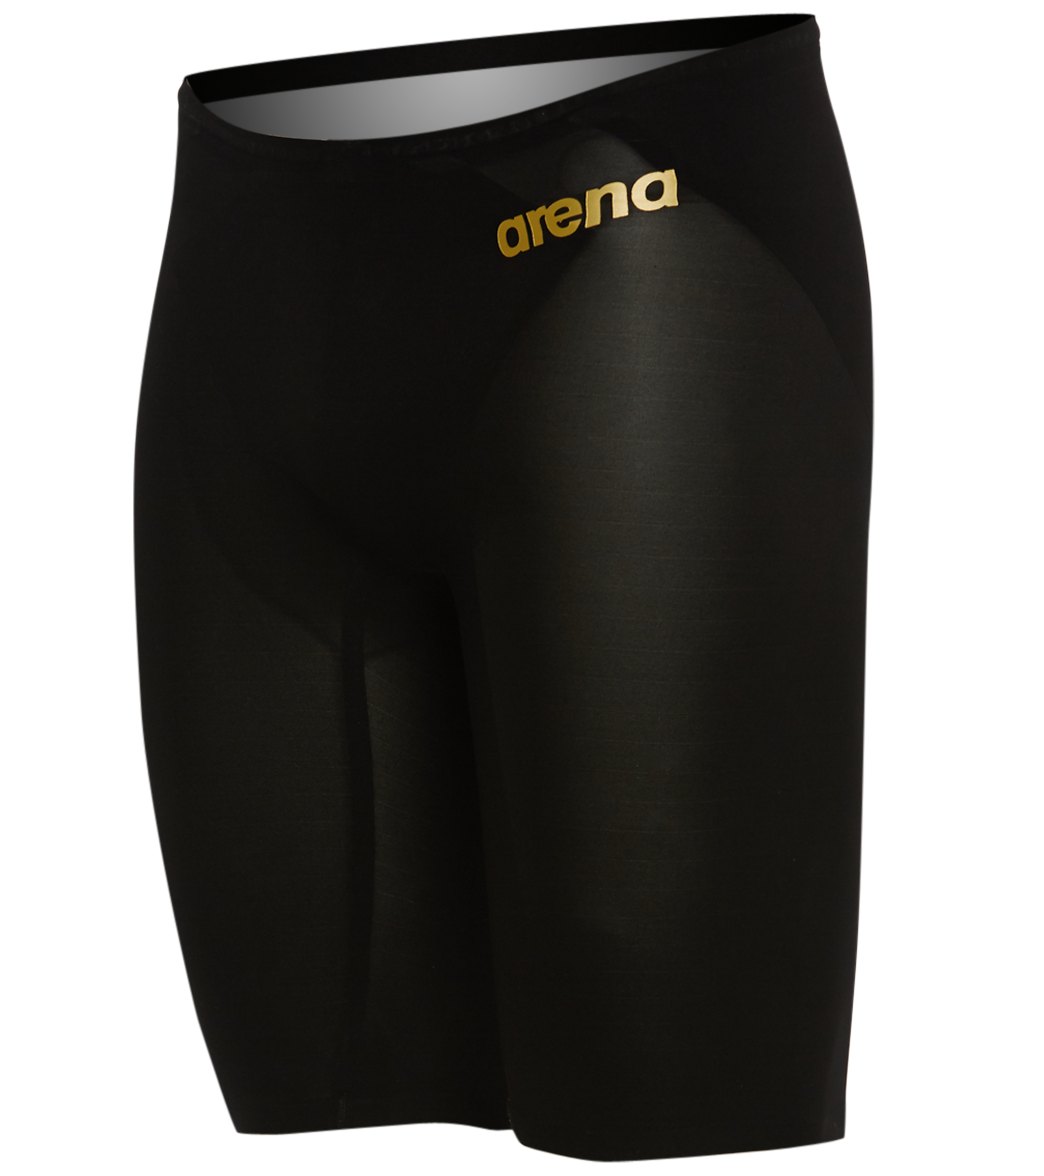 A pair of men's jammers tech suit by the brand Arena. The swimwear is black with a sleek, form-fitting design.